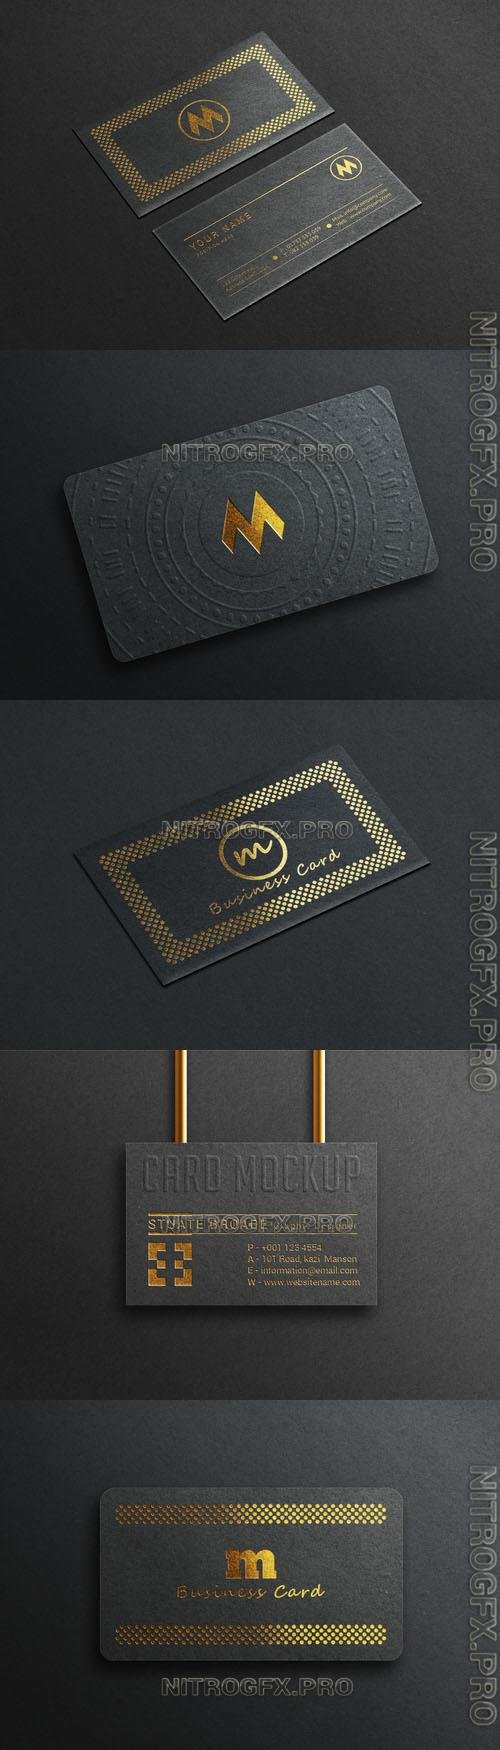 Luxury black psd business card mockup with realistic gold style